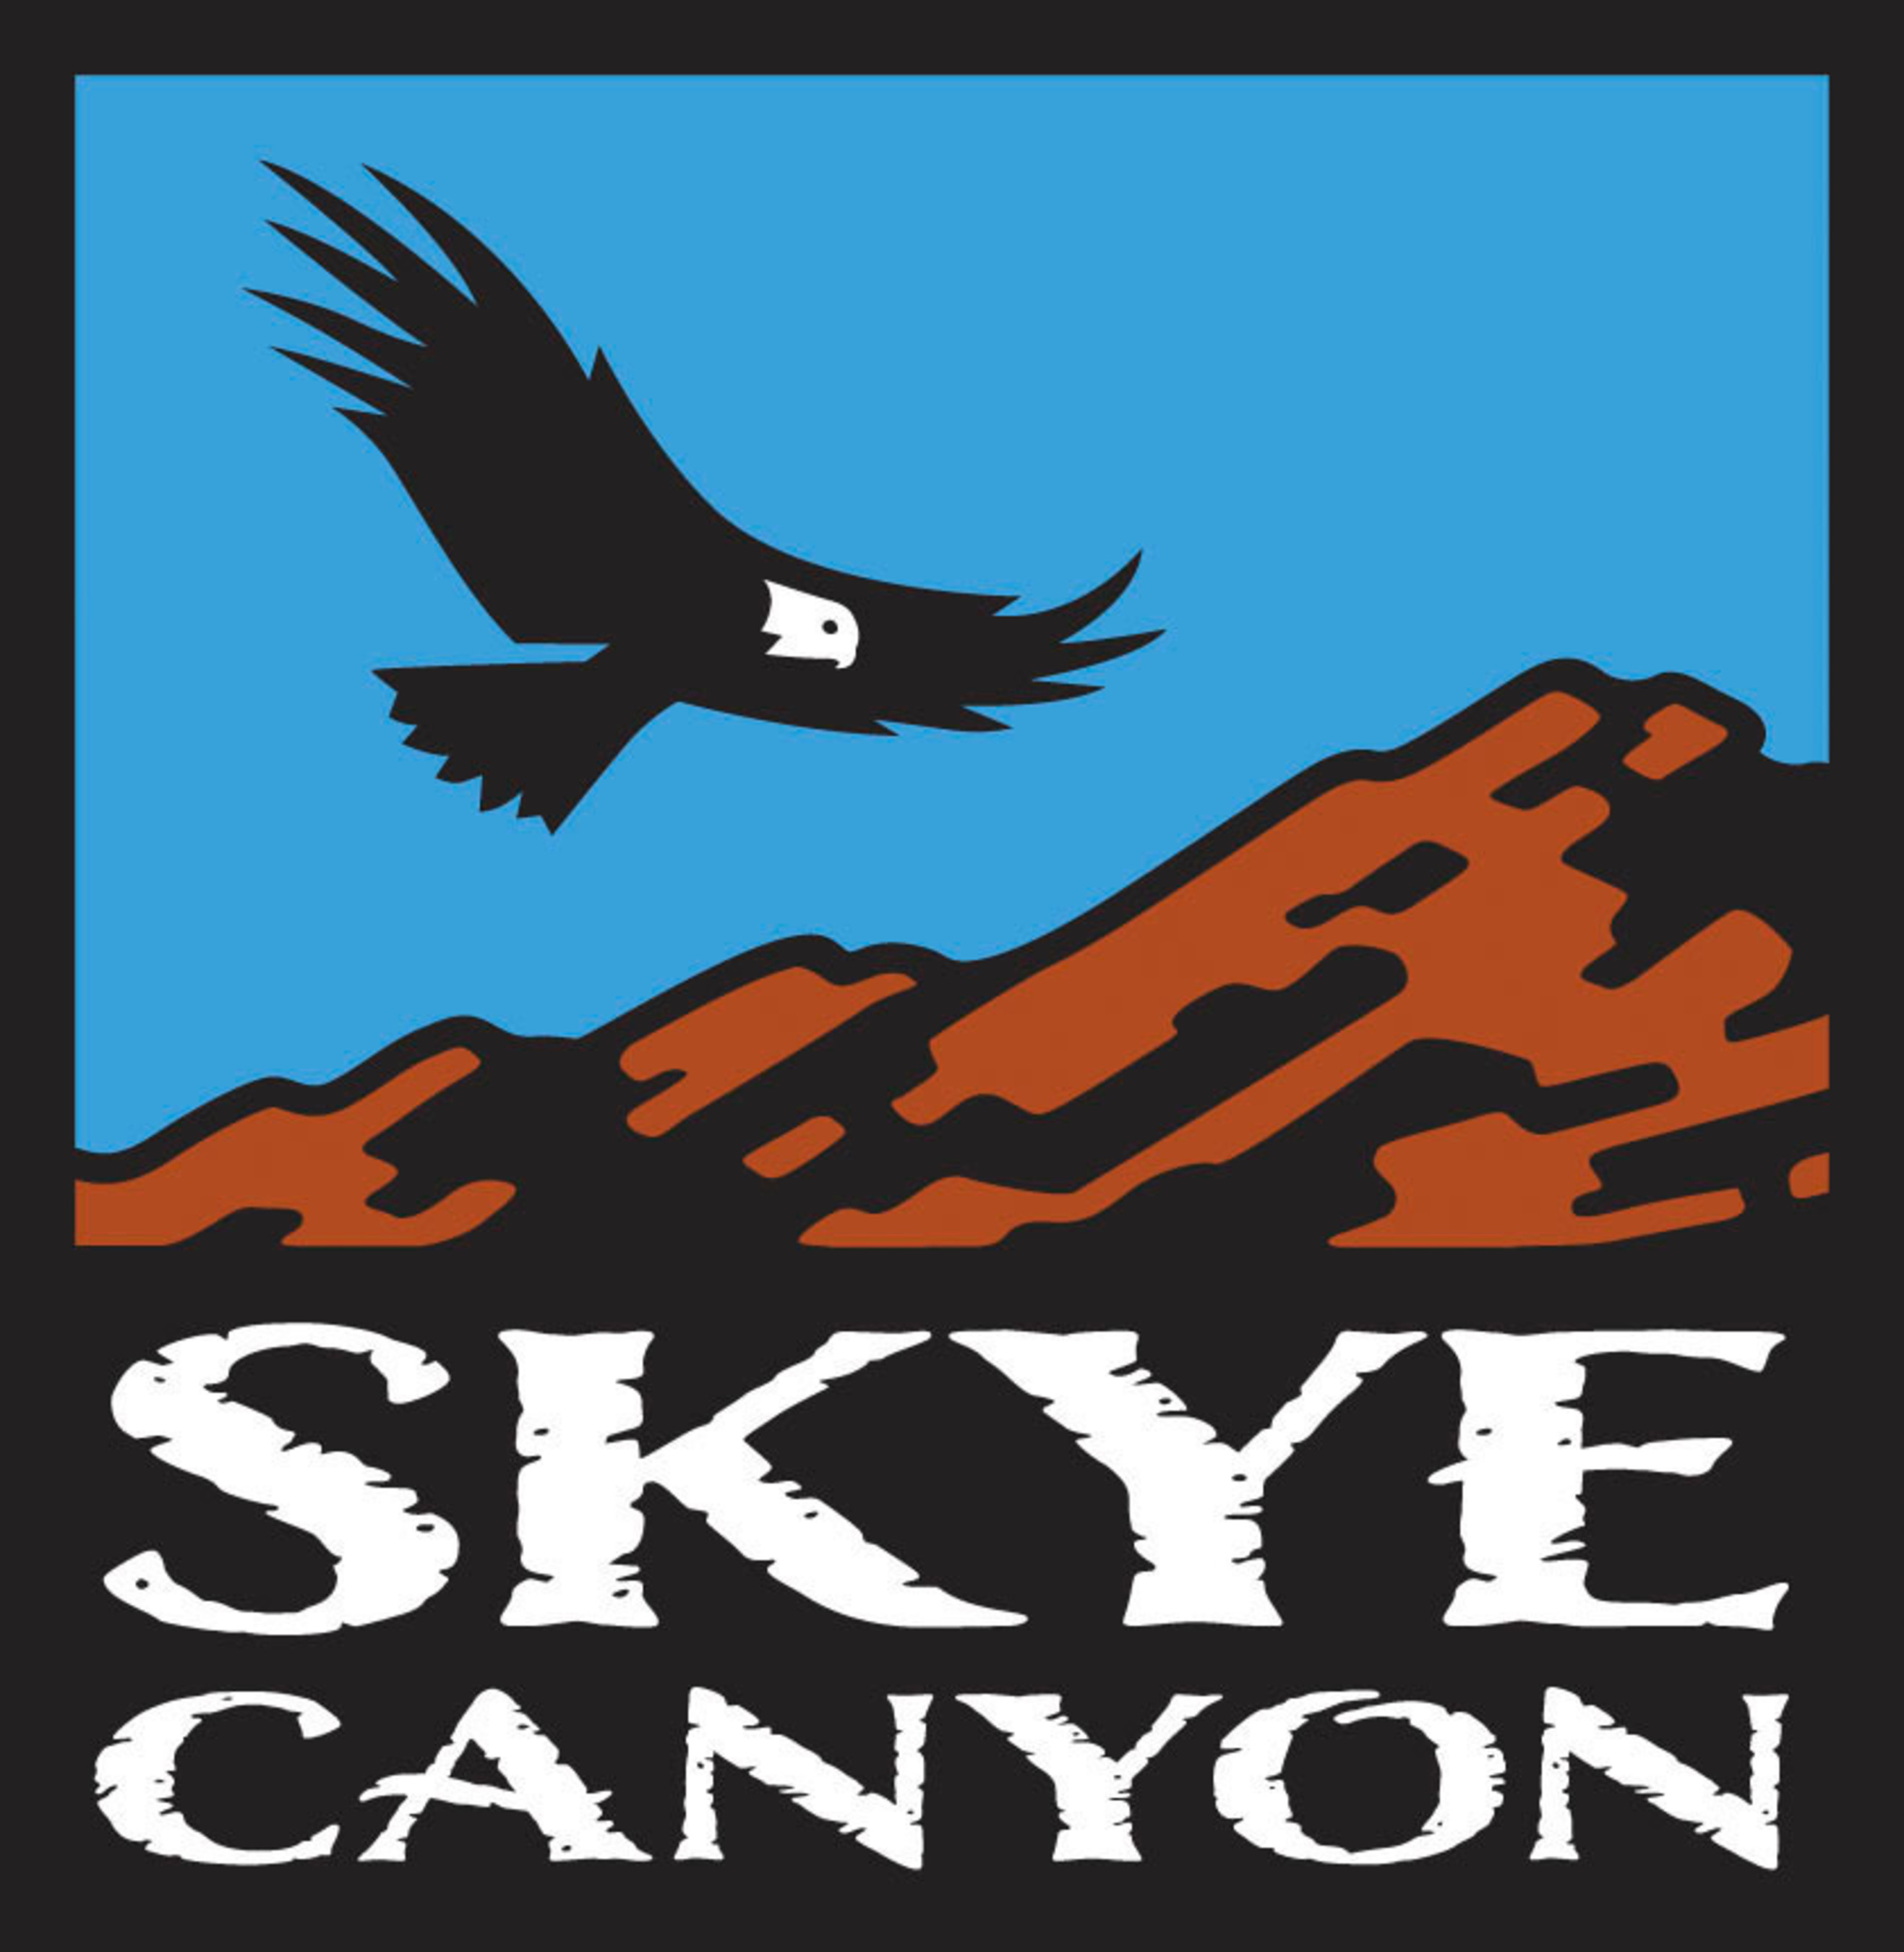 SKYE CANYON, Newest Development By Olympia Companies, Officially Announced. (PRNewsFoto/Olympia Companies) (PRNewsFoto/OLYMPIA COMPANIES)